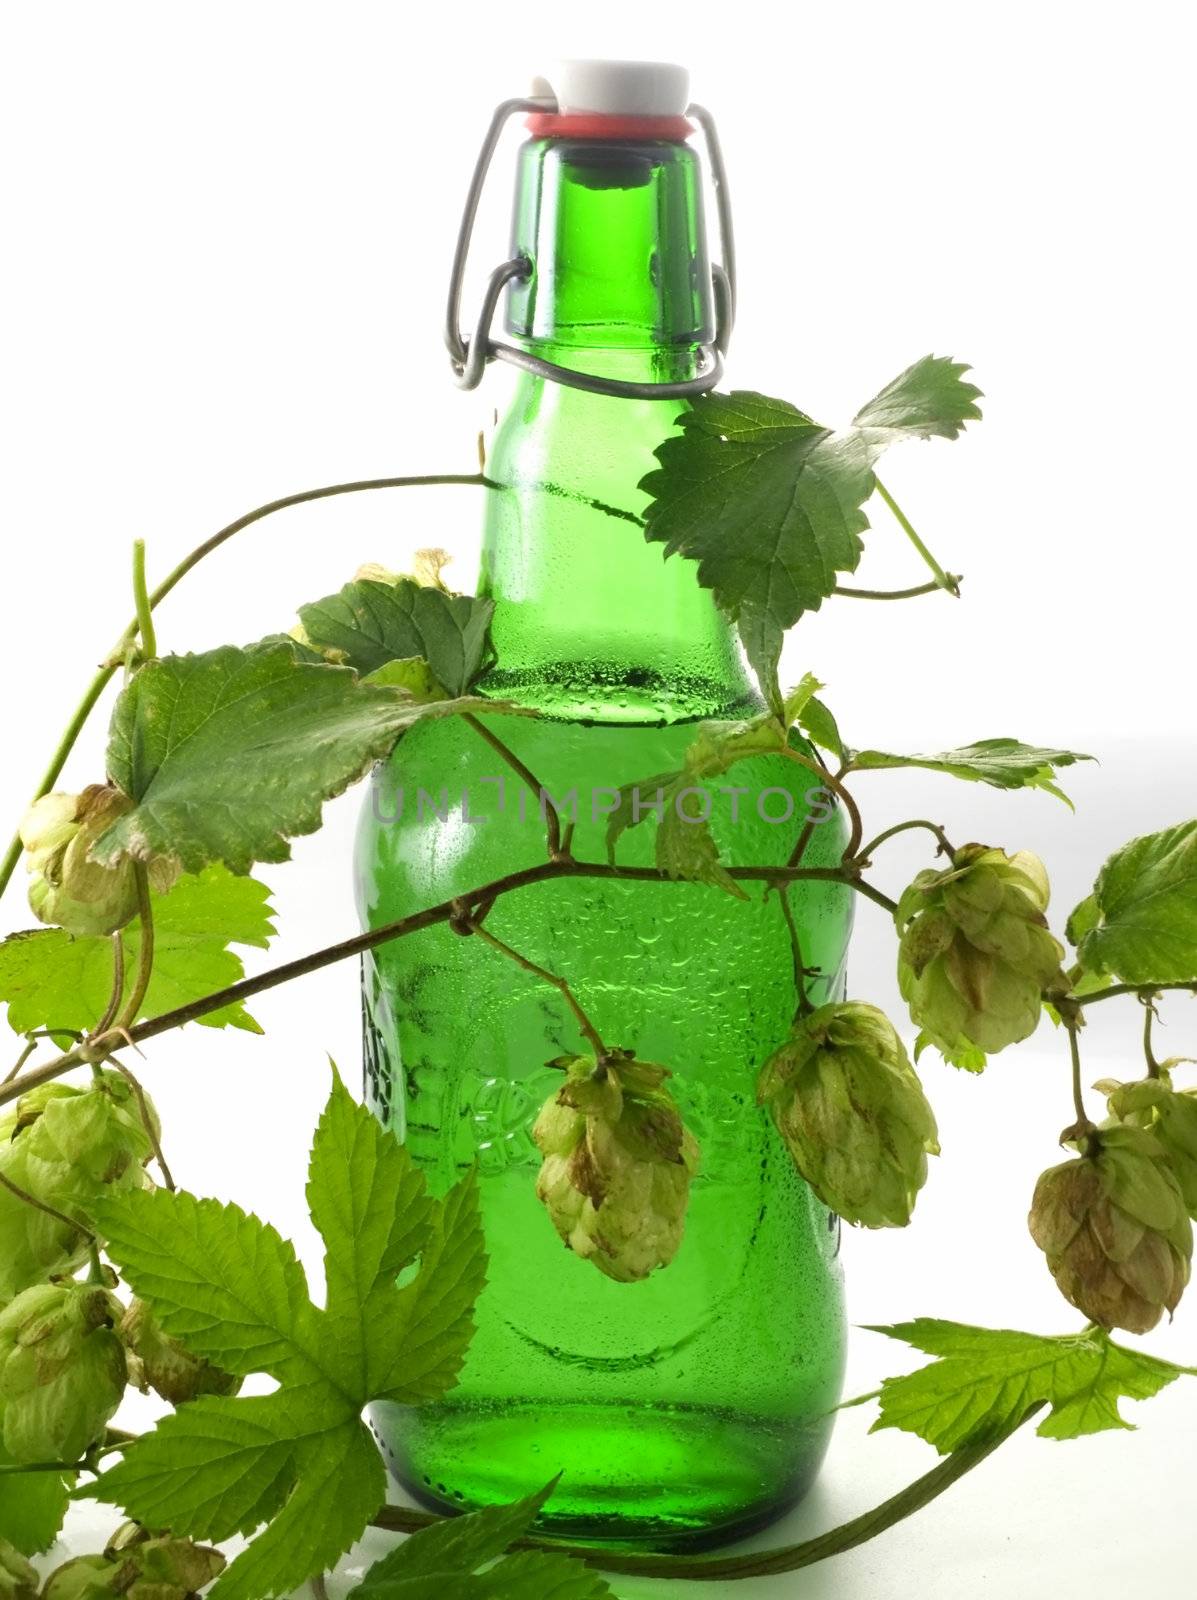 Close-up of Beer bottle isolated on white background